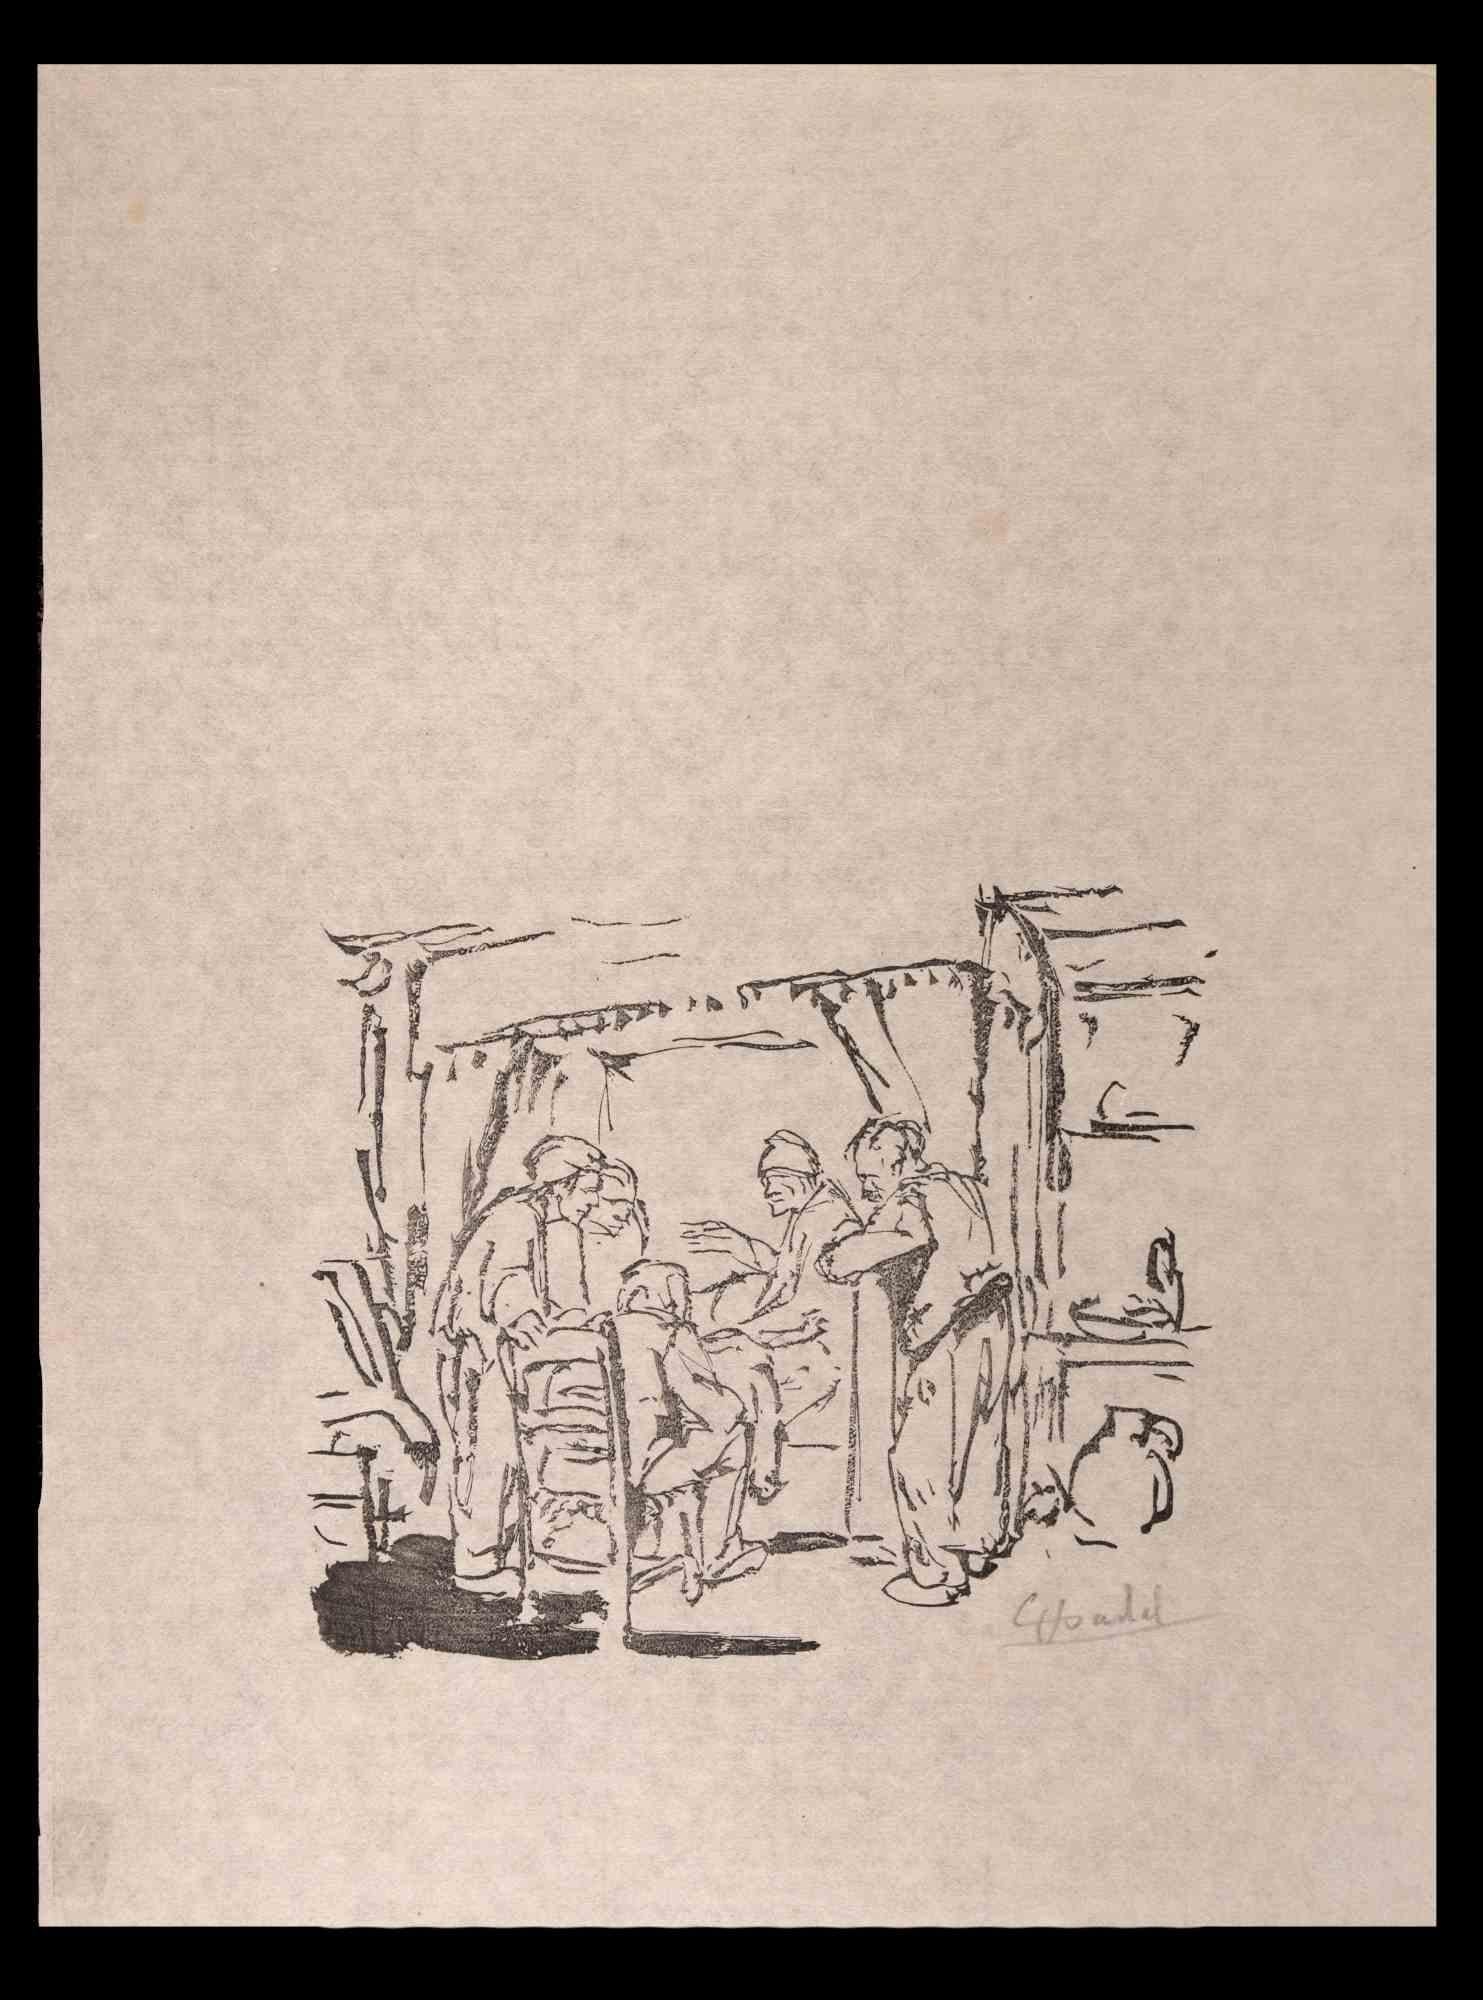 Visit is an original artwork realized by Jules Chadel (1870-1941). Woodcut print. Hand signed on the lower right. Is not dated but we can attribute the period late 19th Century. Passpartout cm 44,5x32,5

The artist presents an interior of a room